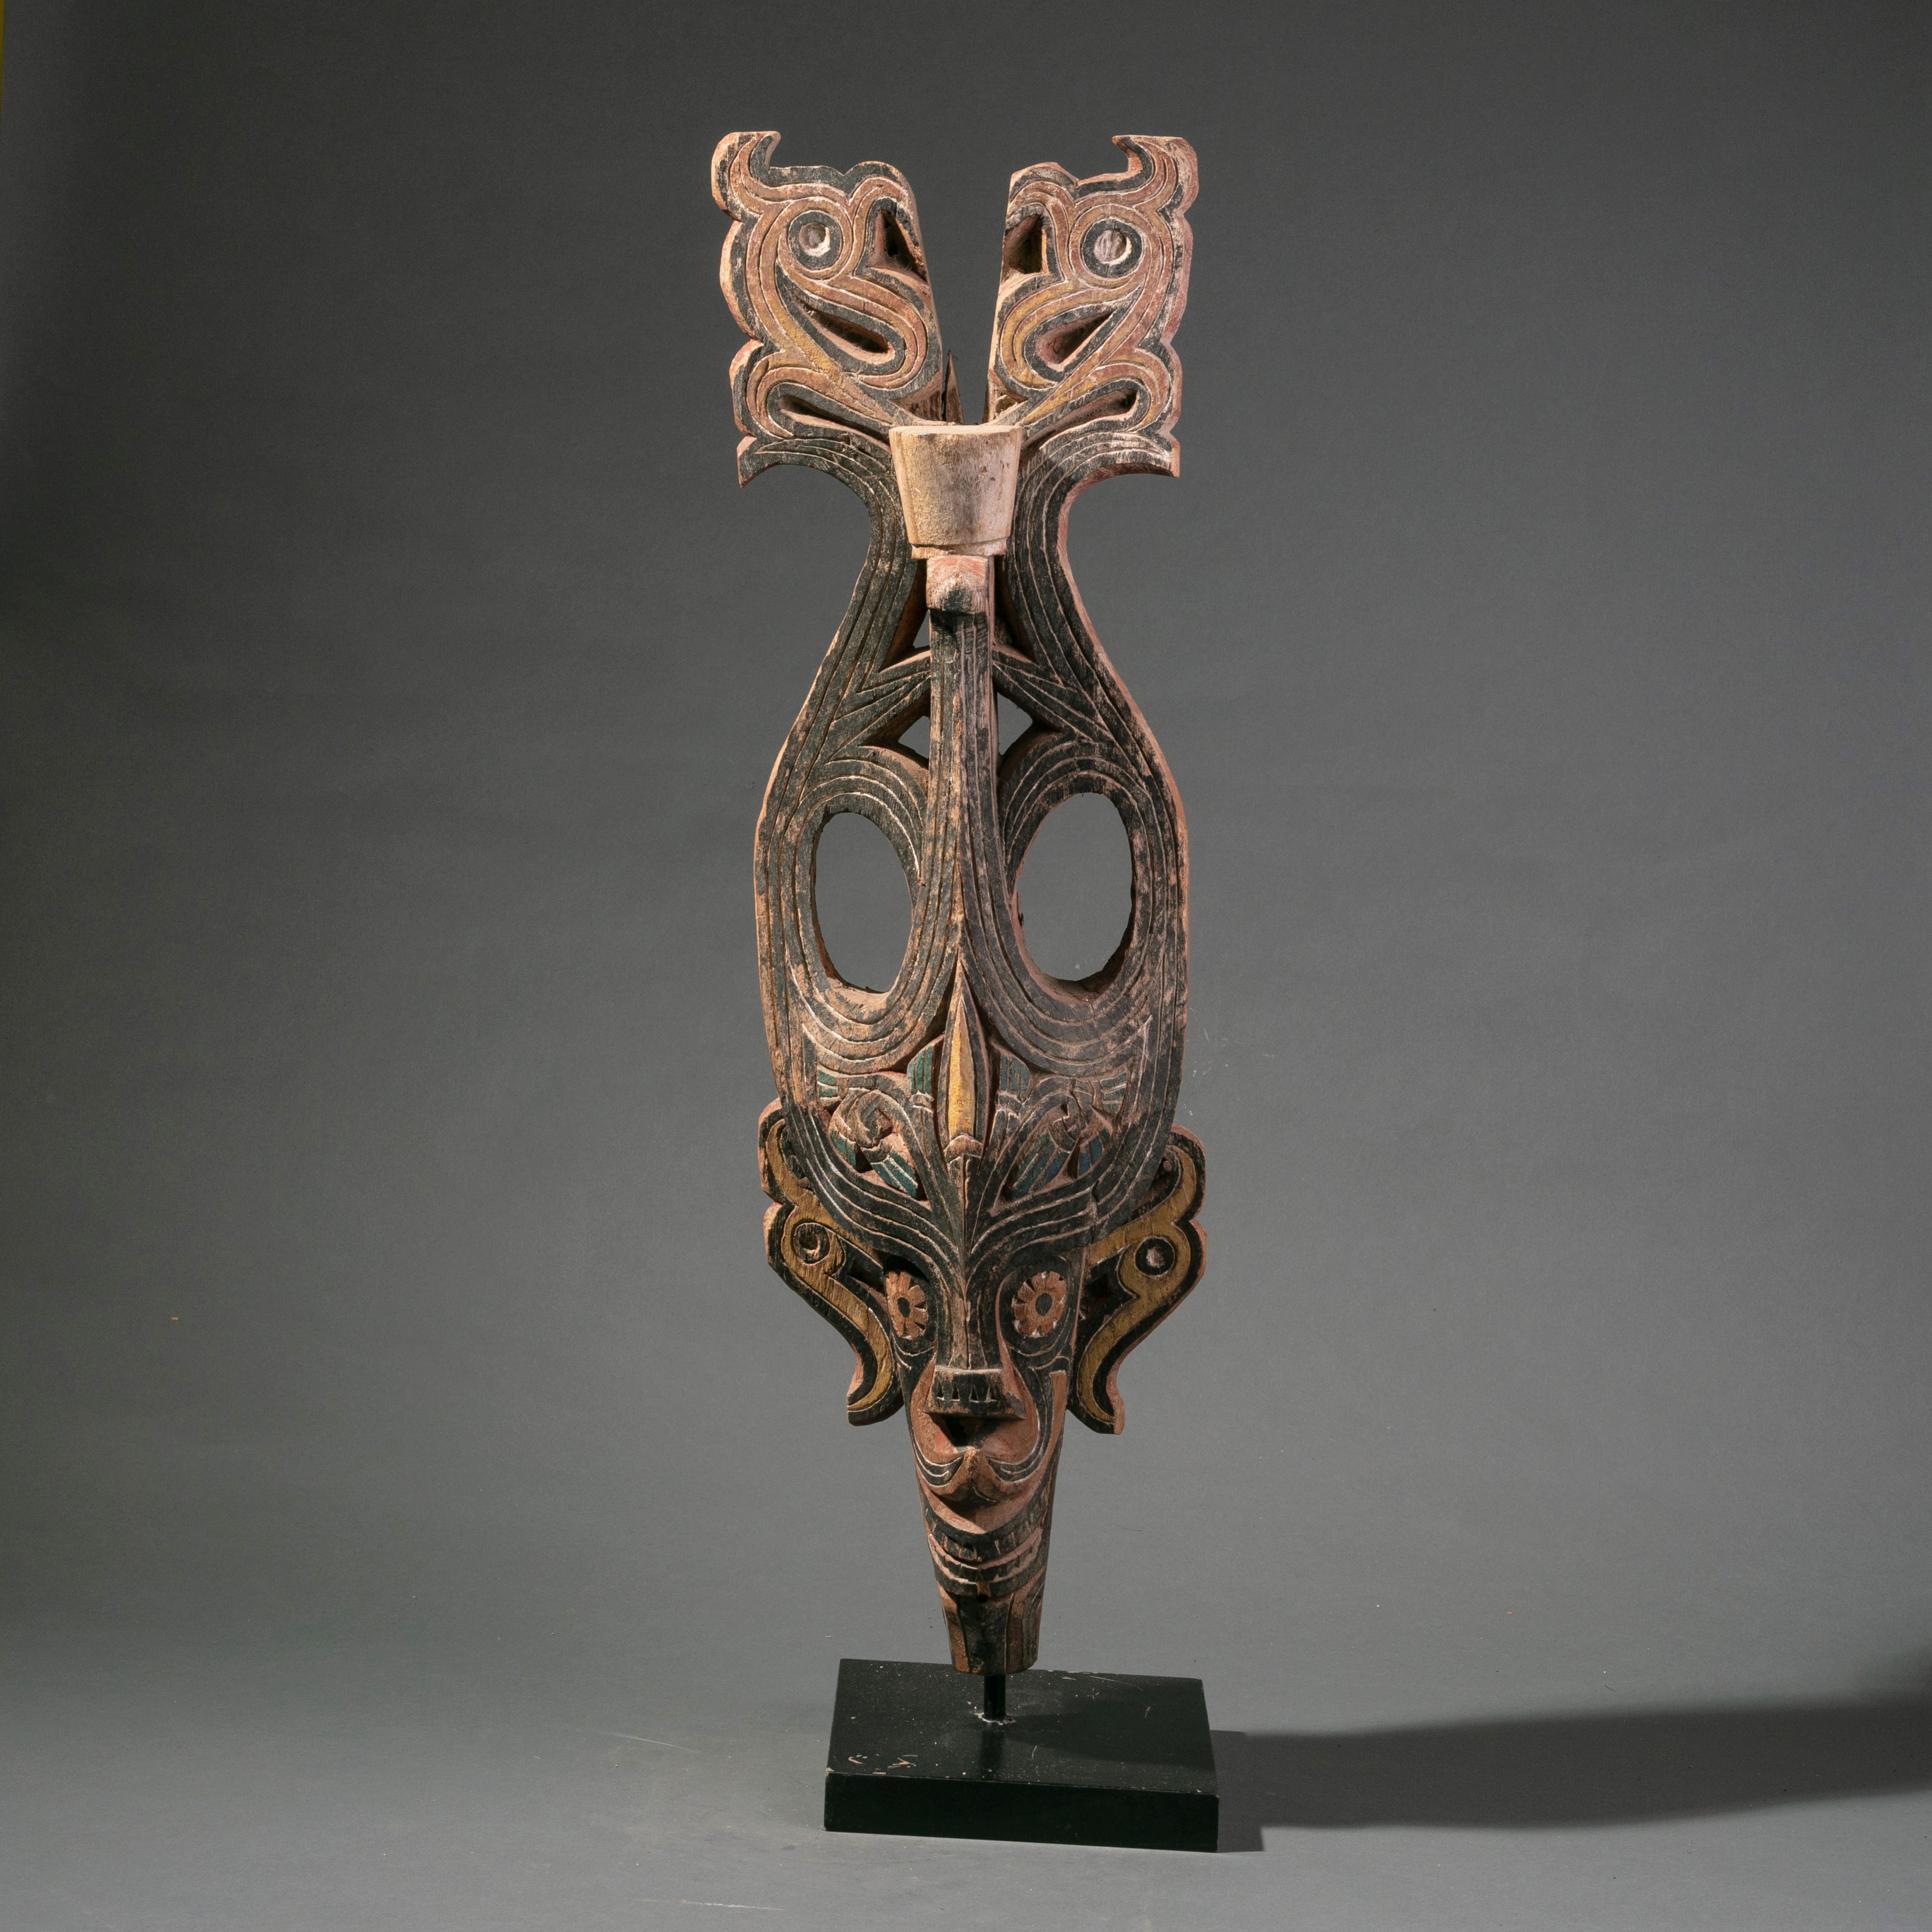 SD A DAYAK  MASK SCULPTURE  FROM INDONESIA No 890 